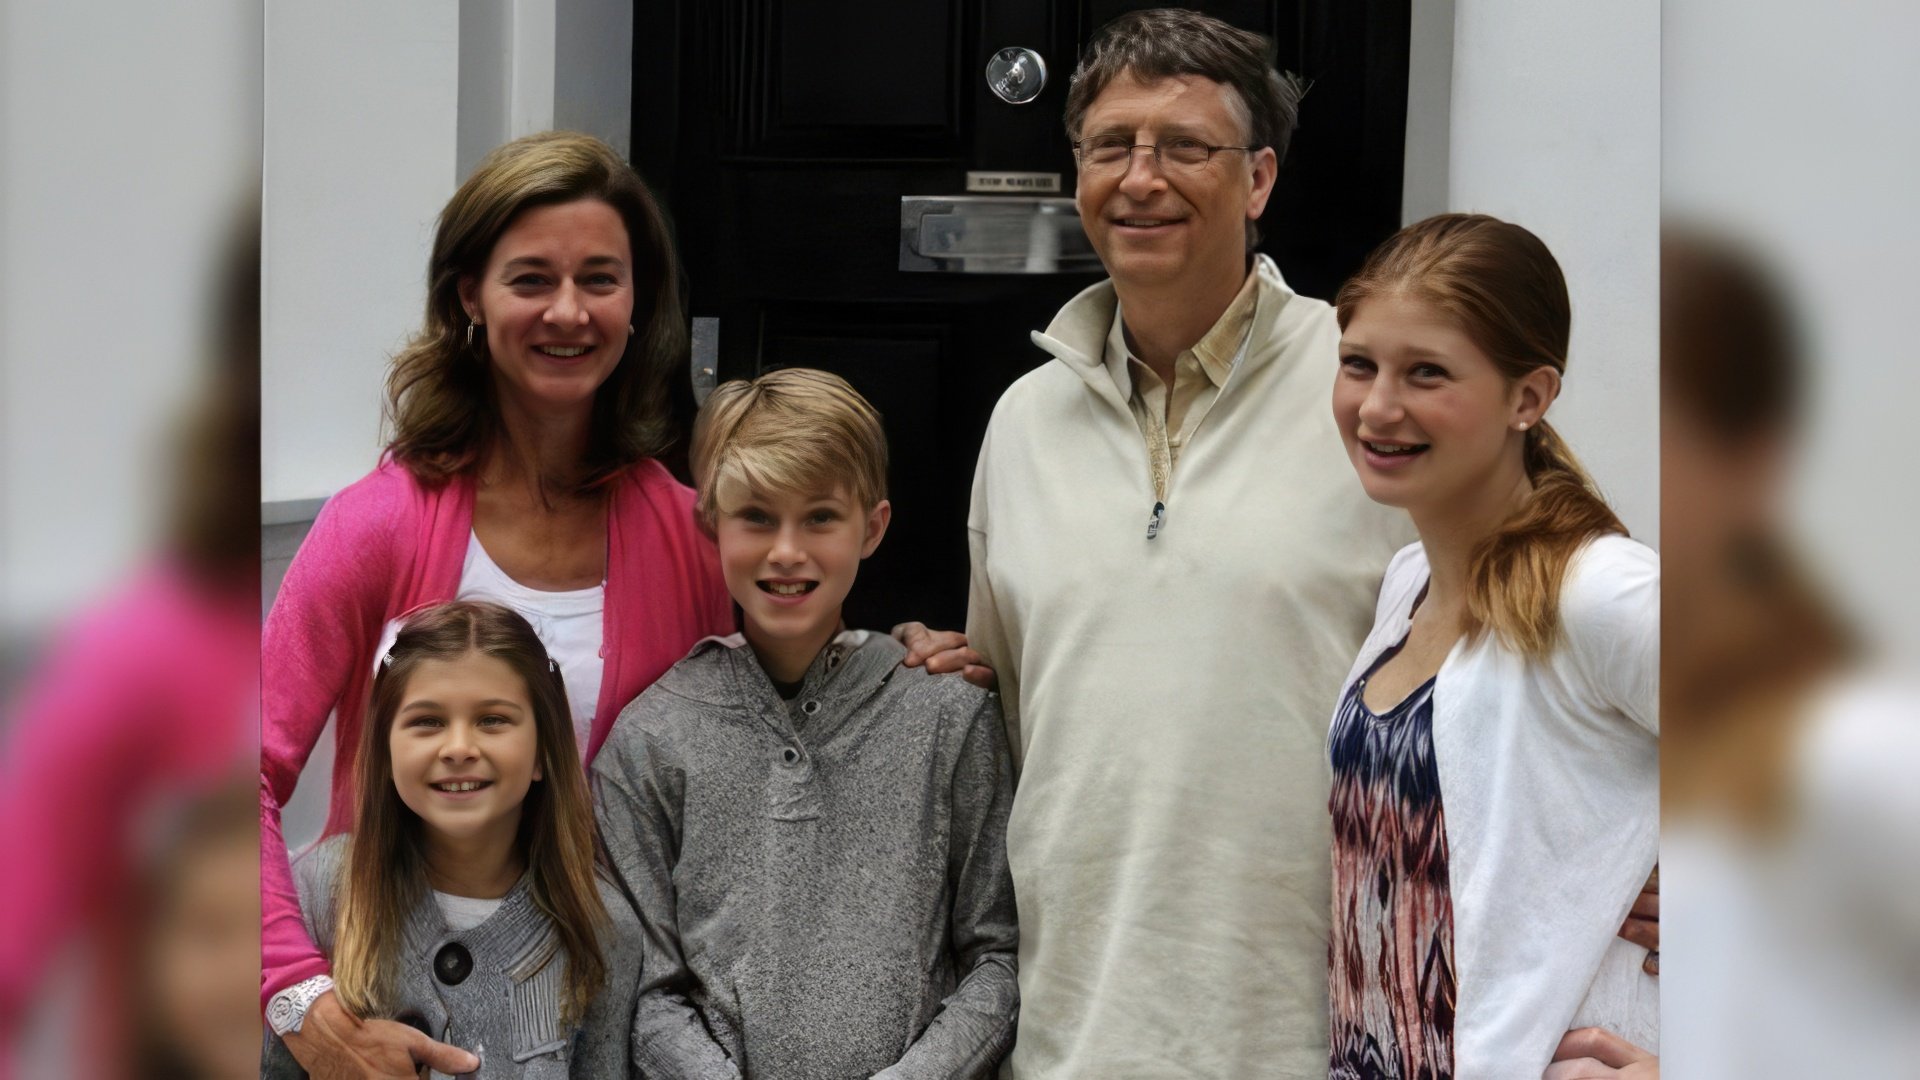 Bill Gates with his wife and children